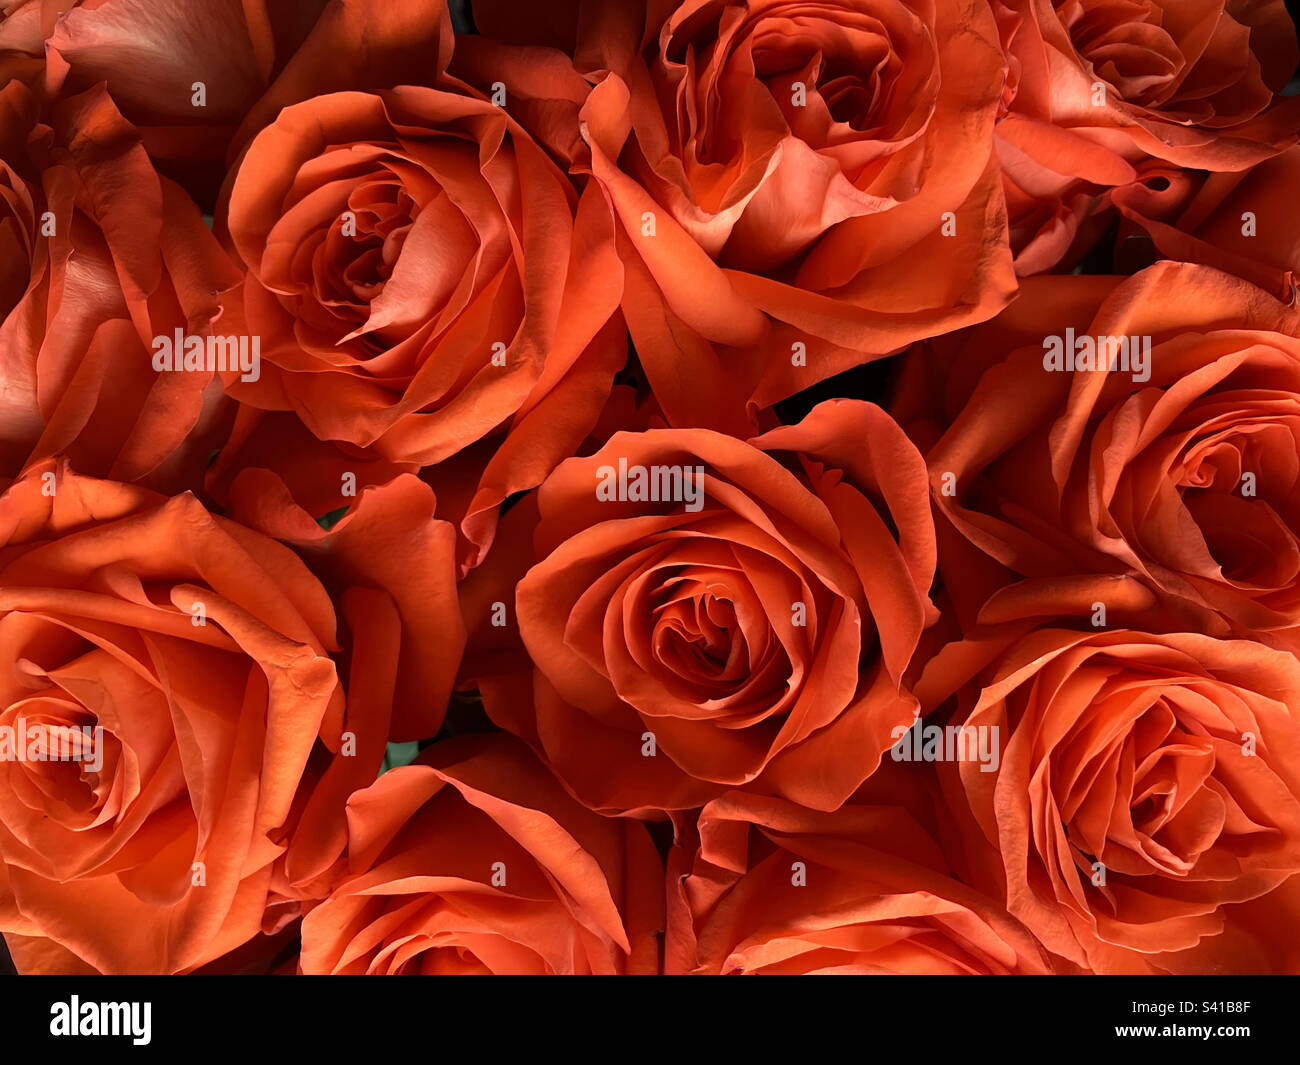 Bouquet of bright orange roses, detail of flowers from above Stock Photo